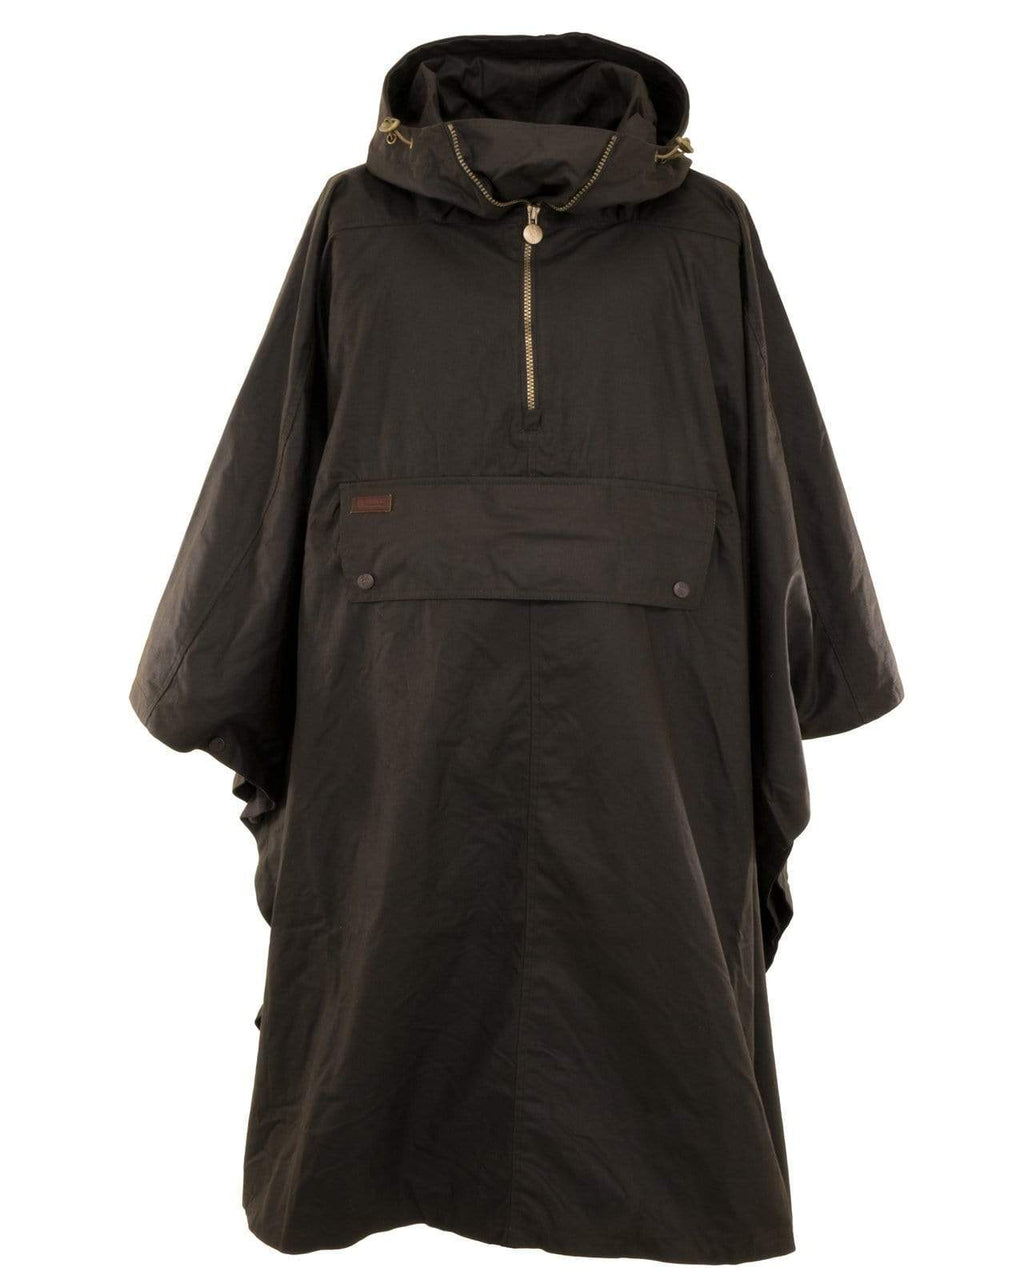 Packable Poncho | Rain Jackets by Outback Trading Company ...